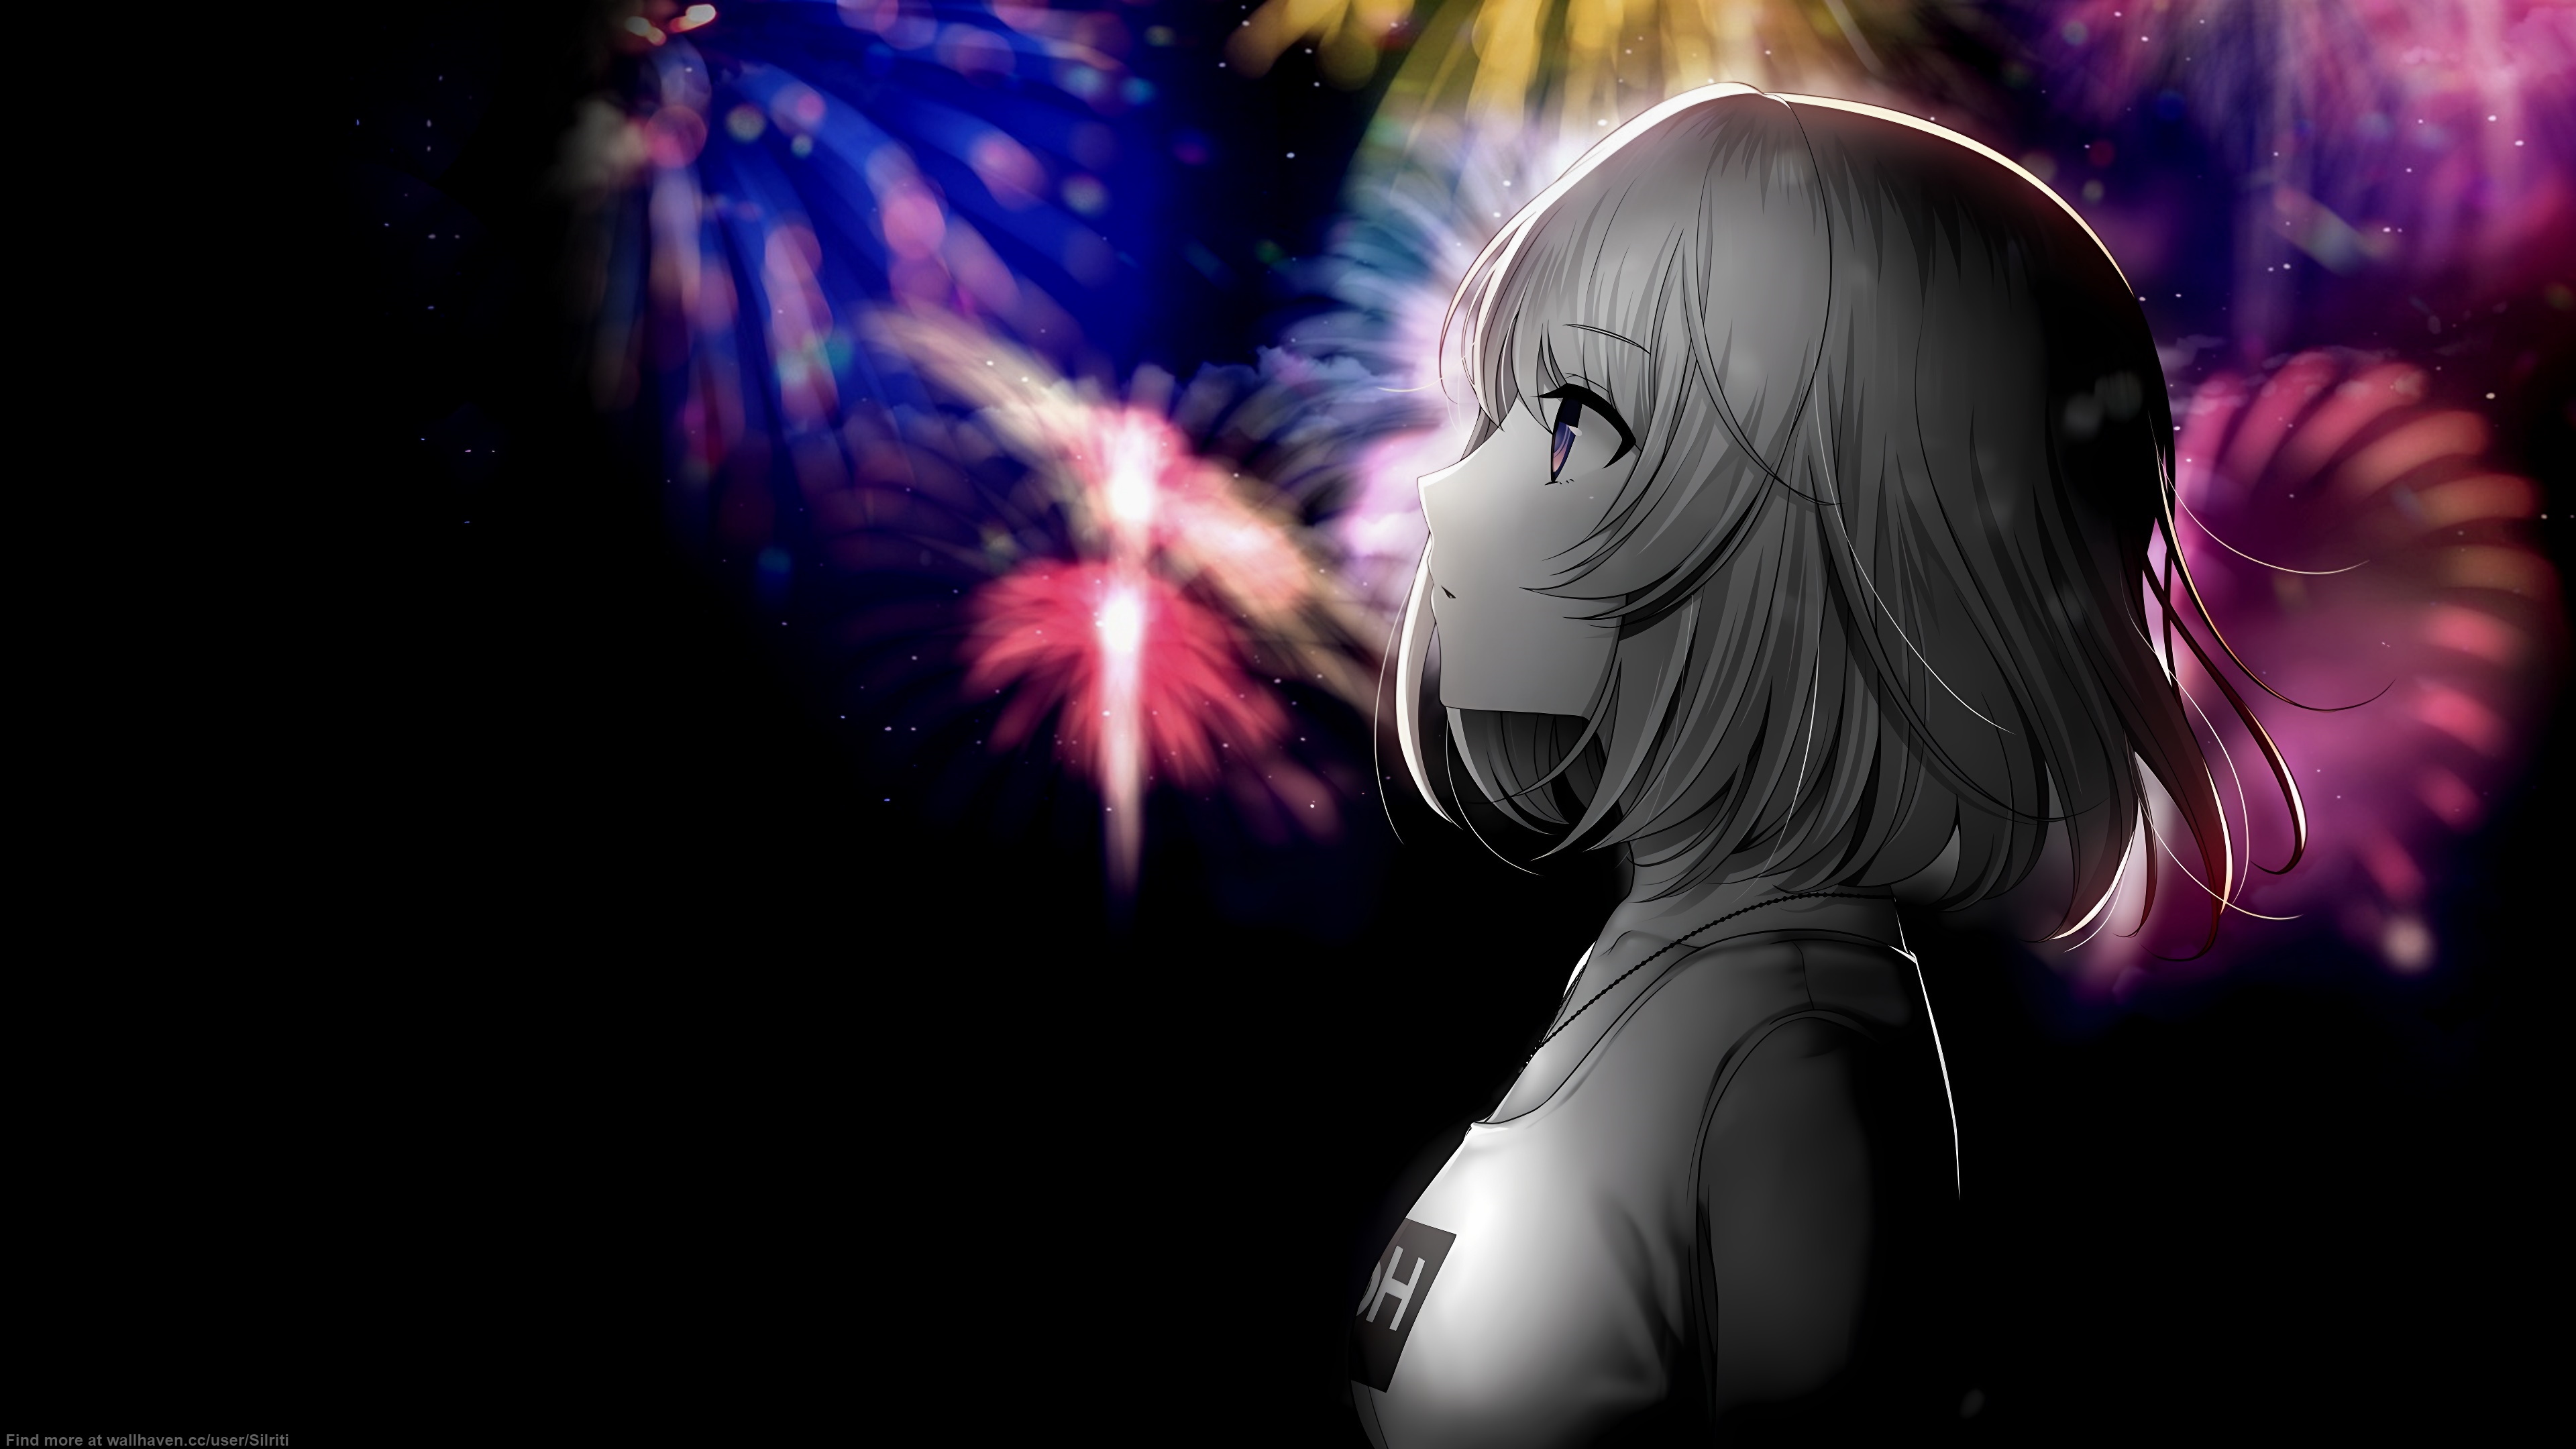 Anime 3840x2160 black background dark background simple background anime girls selective coloring fireworks